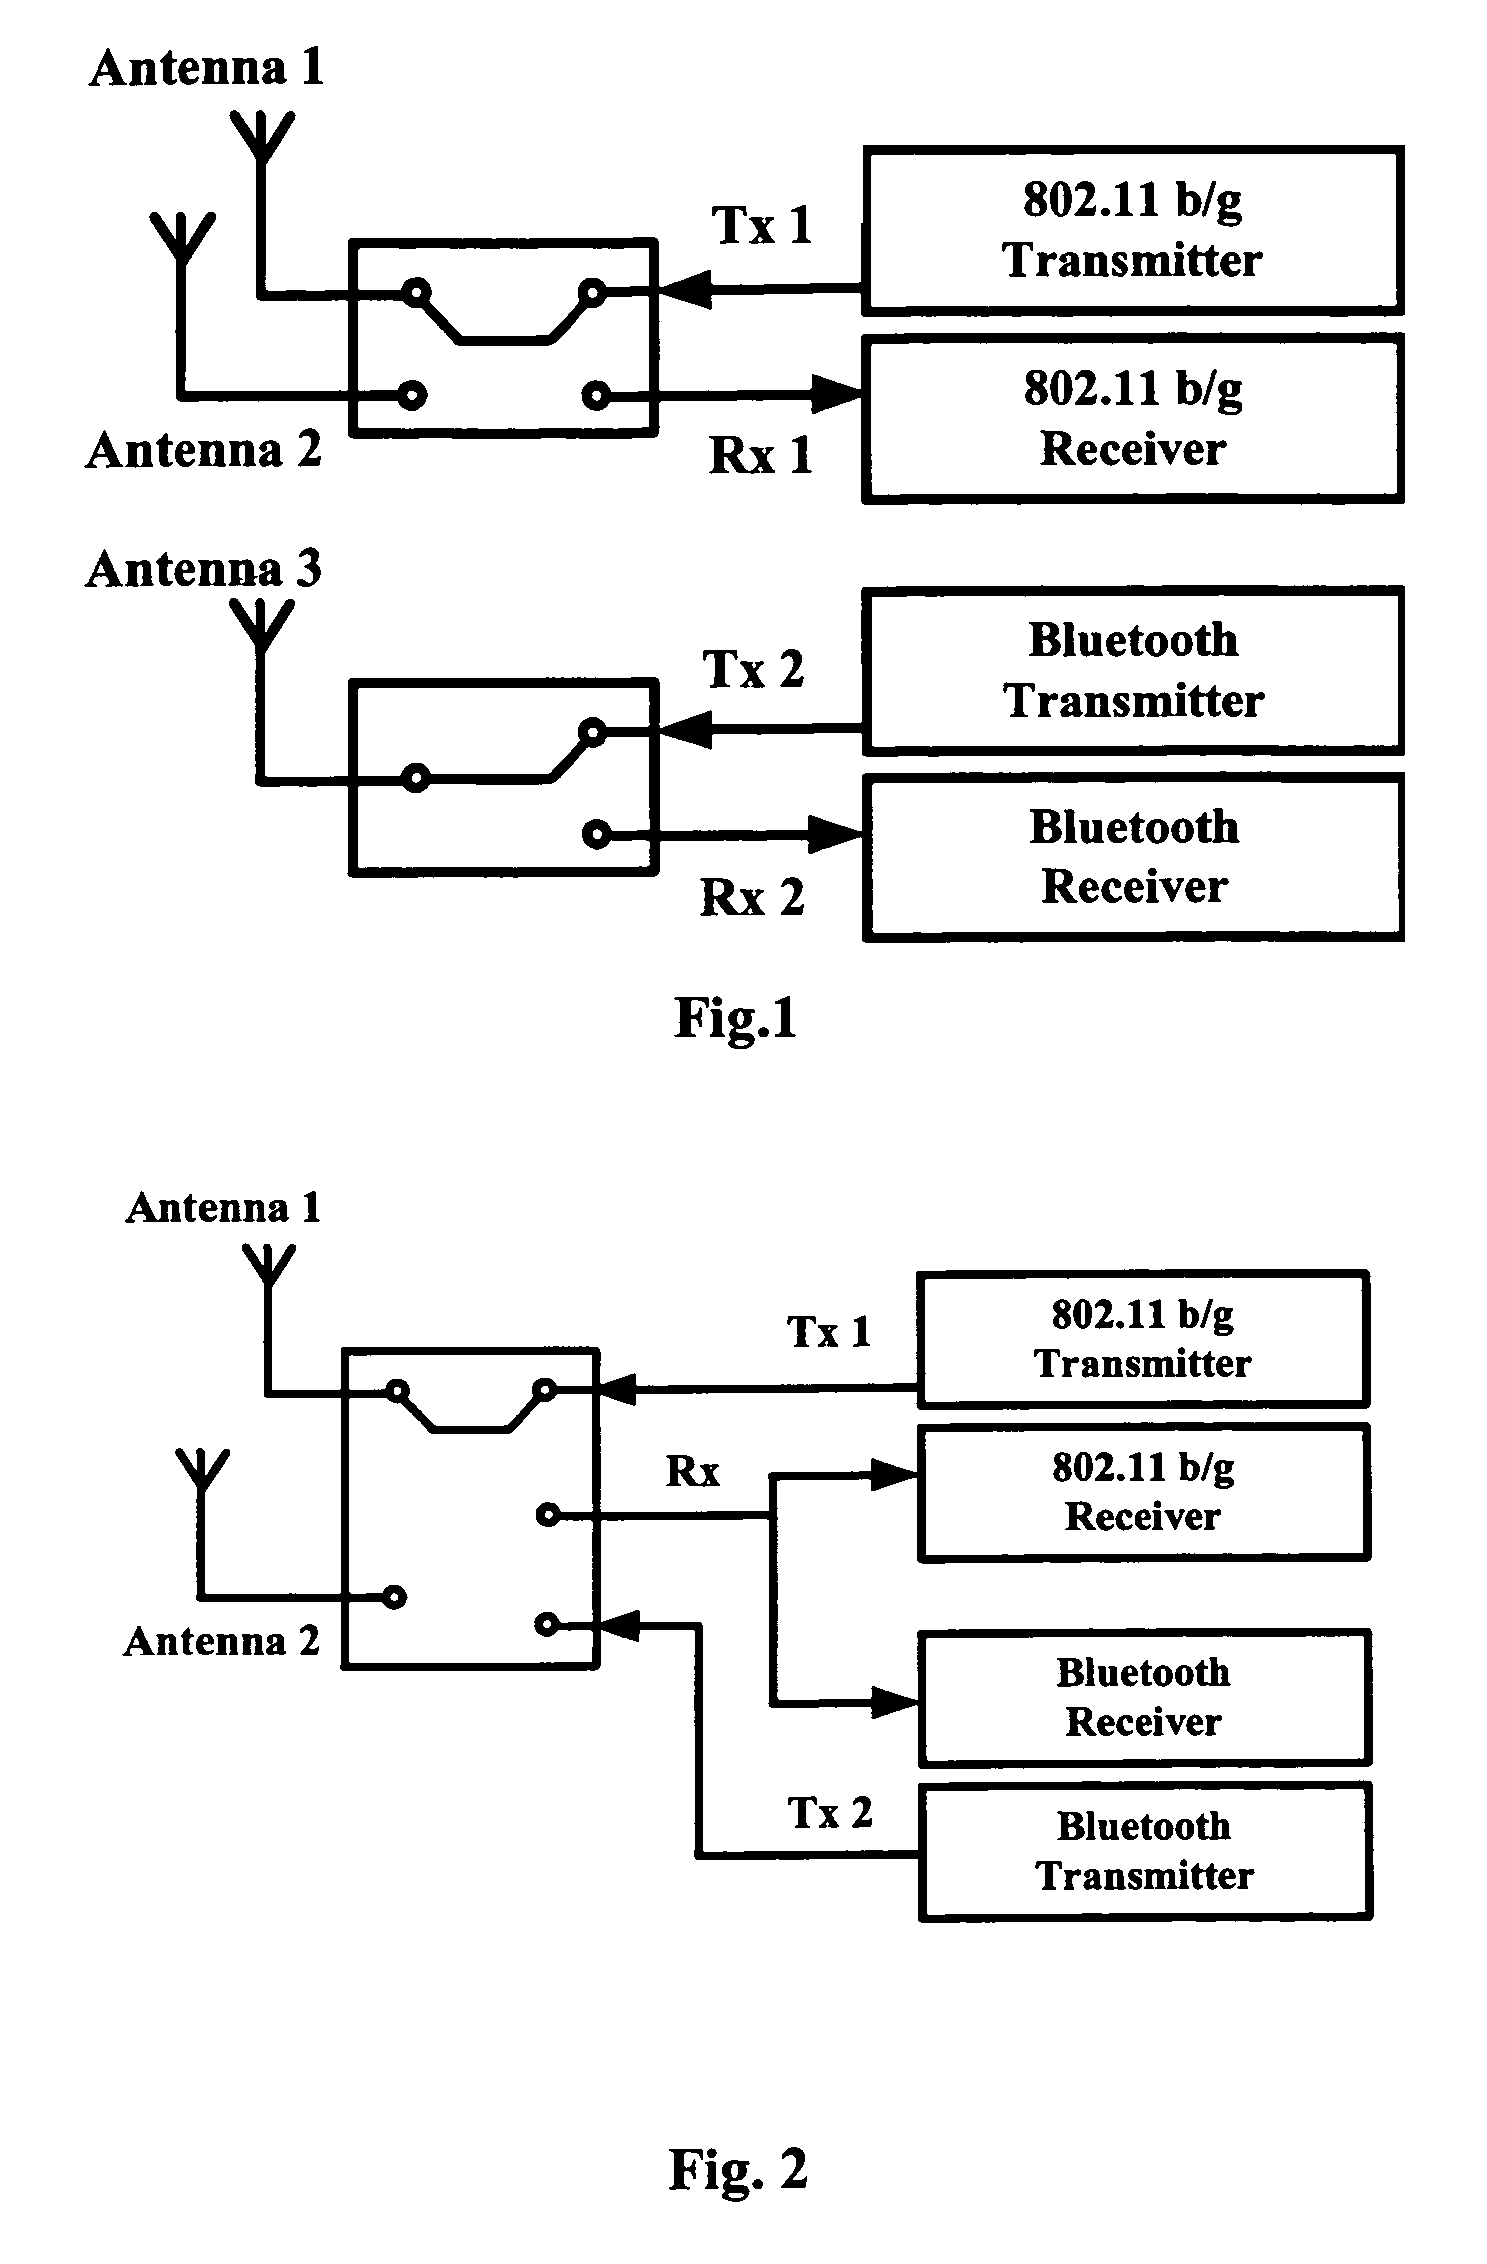 Antenna diversity switch of wireless dual-mode co-existence systems